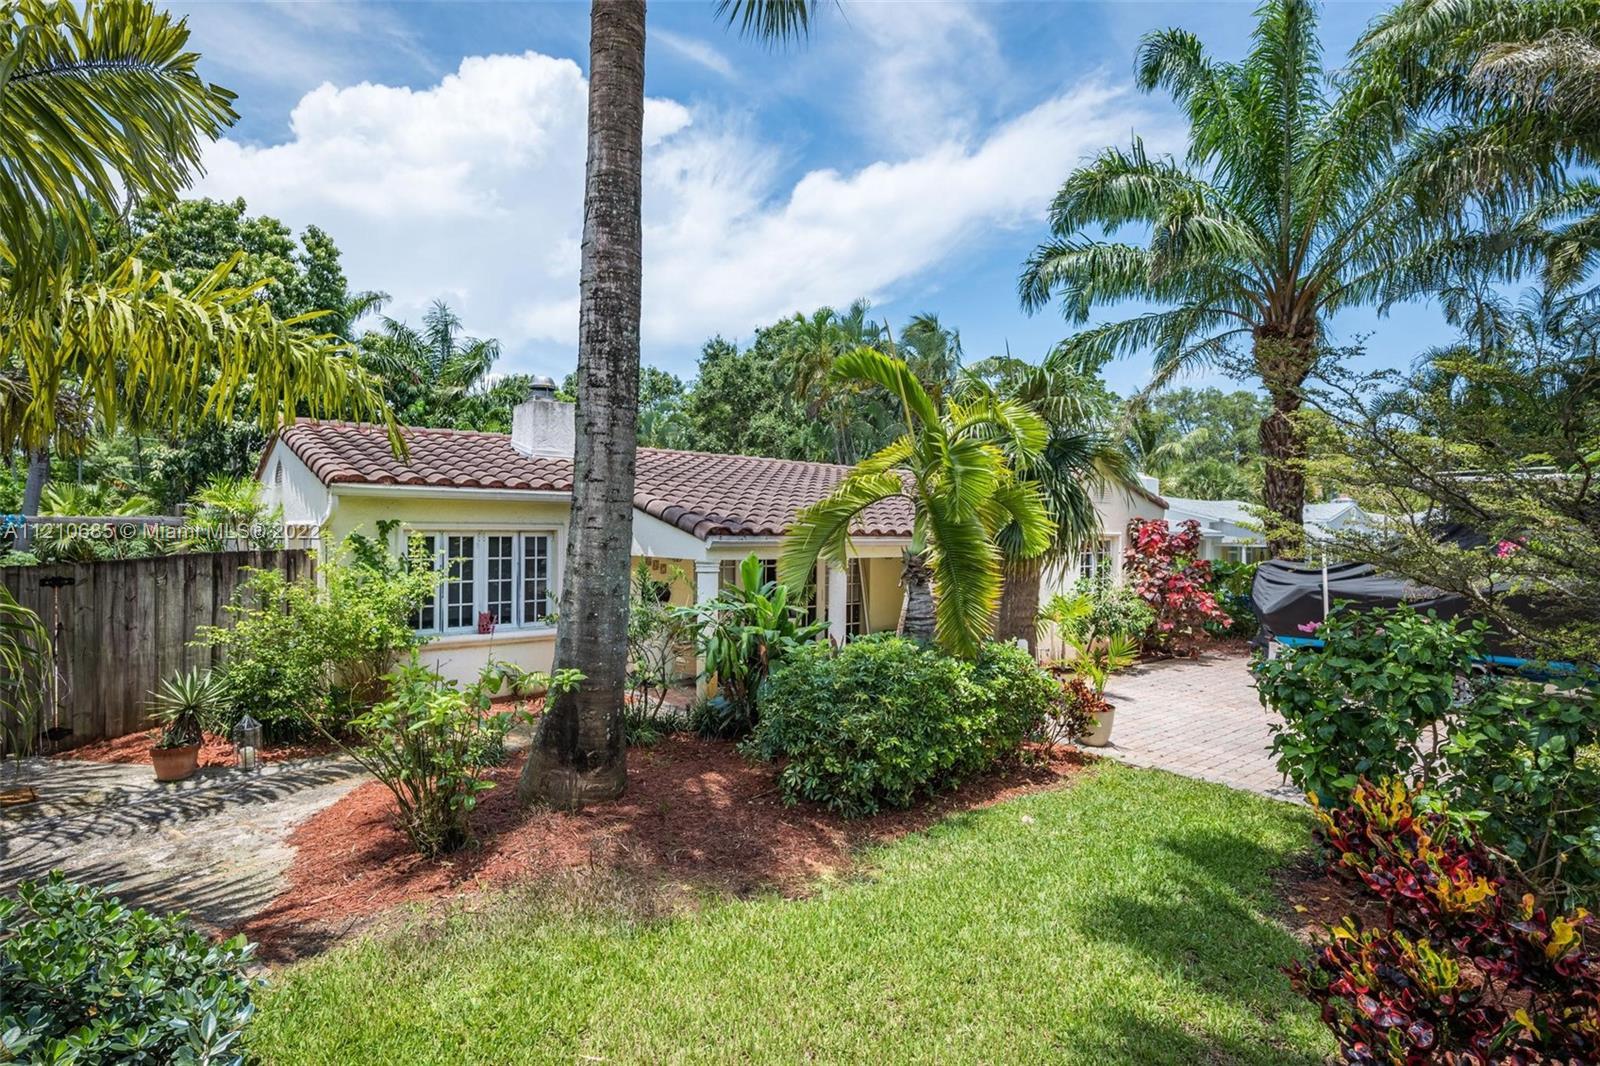 Location Location Location. This charming 1,669sf 3 bed/2 bath Tarpon River home has it all. Open fl